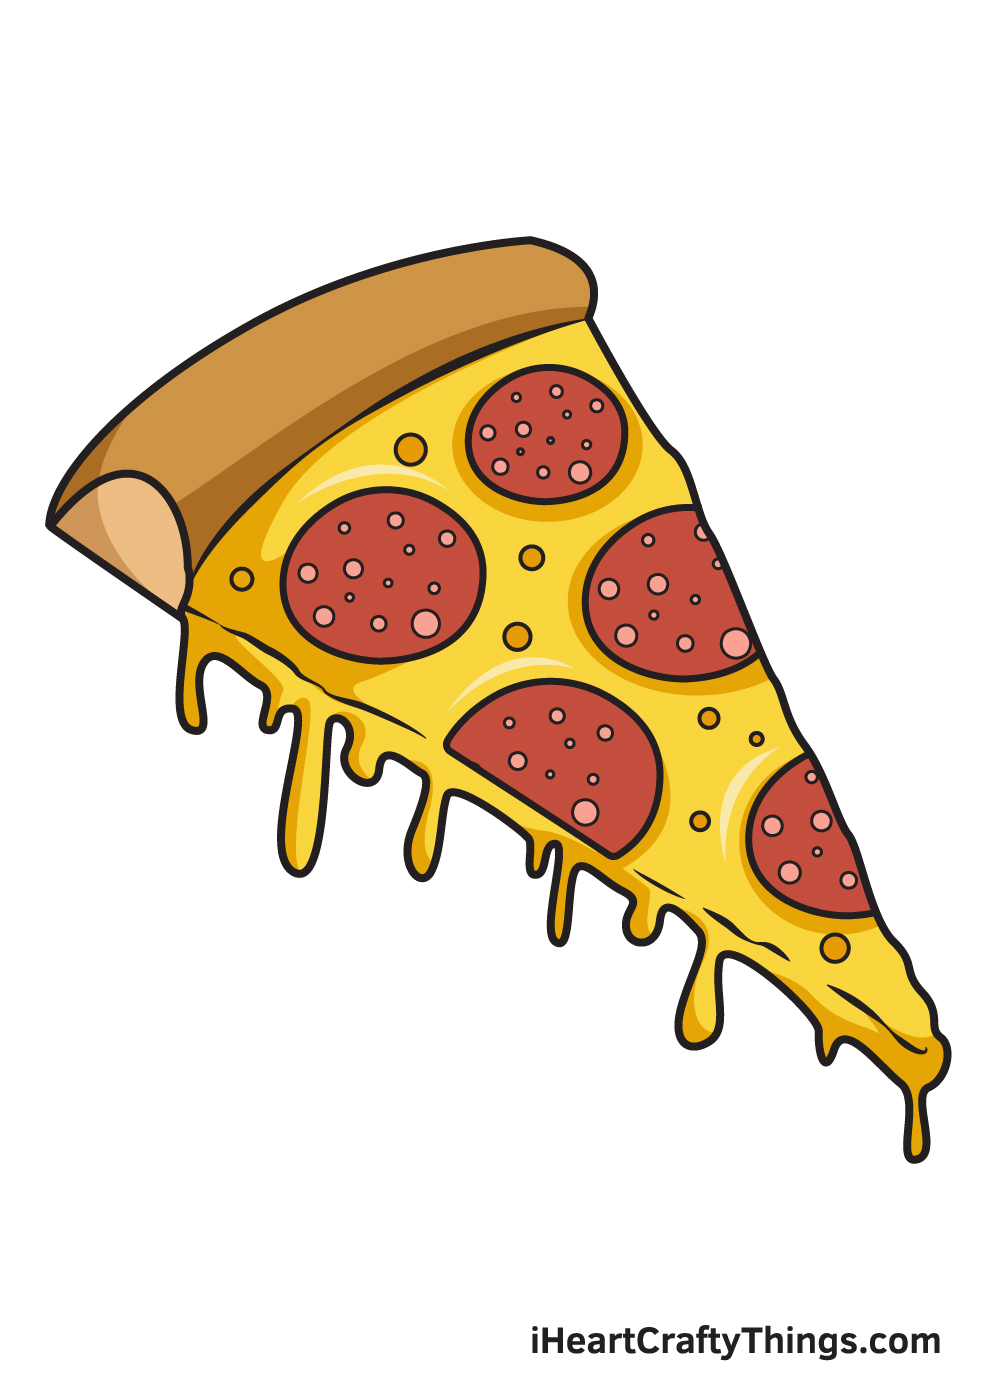 How to draw a cute pizza in 6 EASY STEPS! | Cute pizza, Cute food drawings,  Food drawing easy